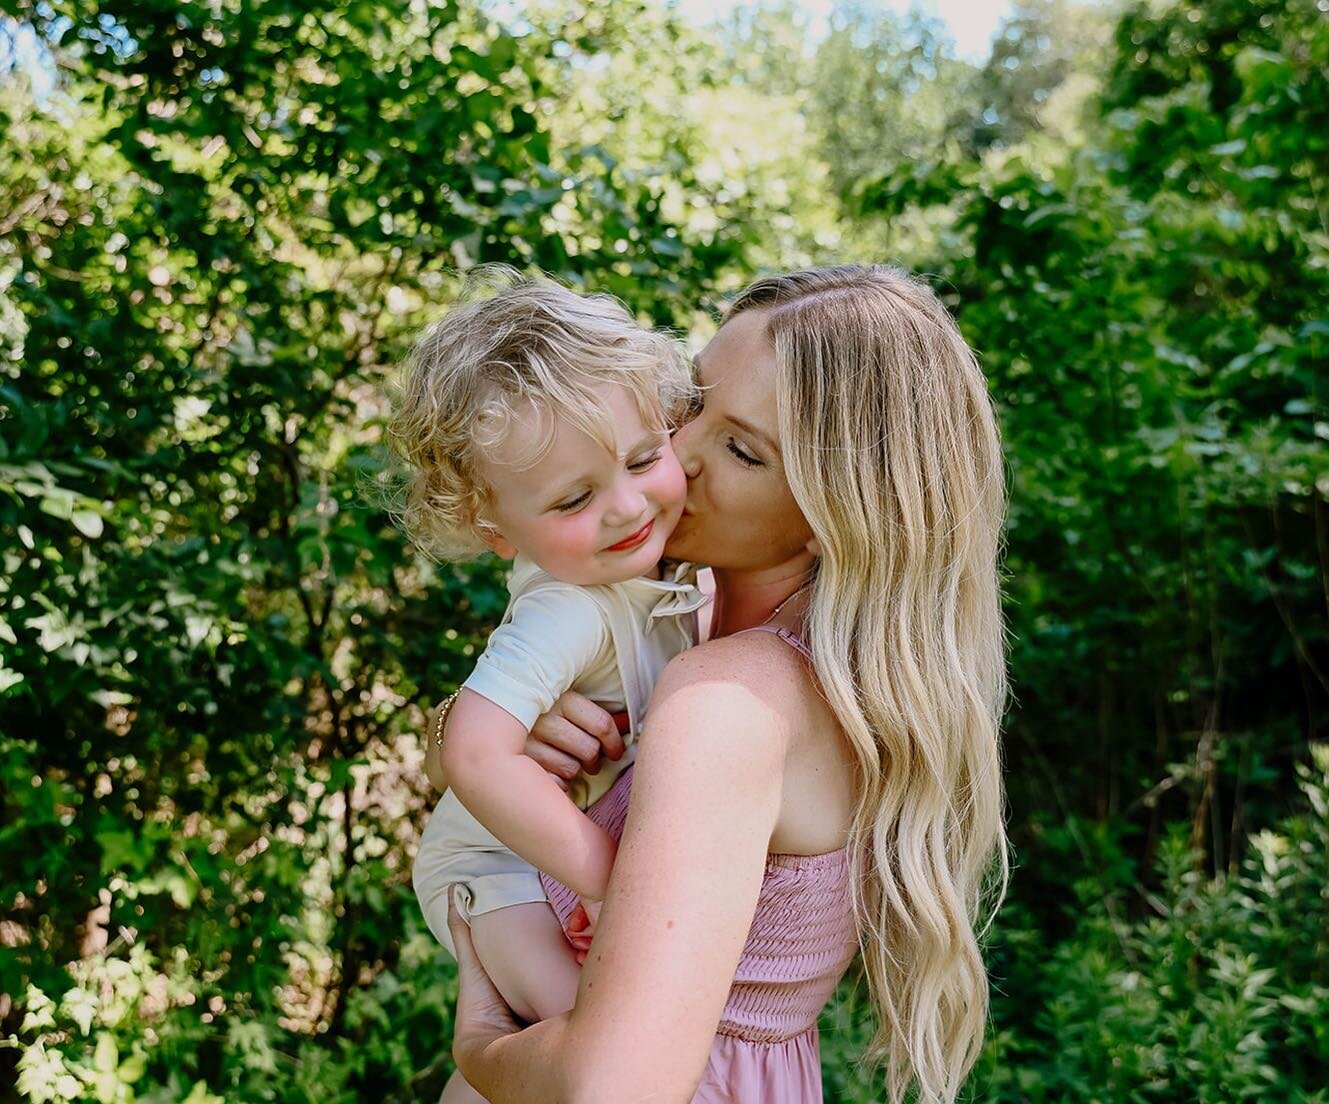 Heaven on earth is looking at my little boy. The purest love I&rsquo;ll ever know. 💕 Happy Mothers Day to all the Mamas! 📷 @lillylove_photography